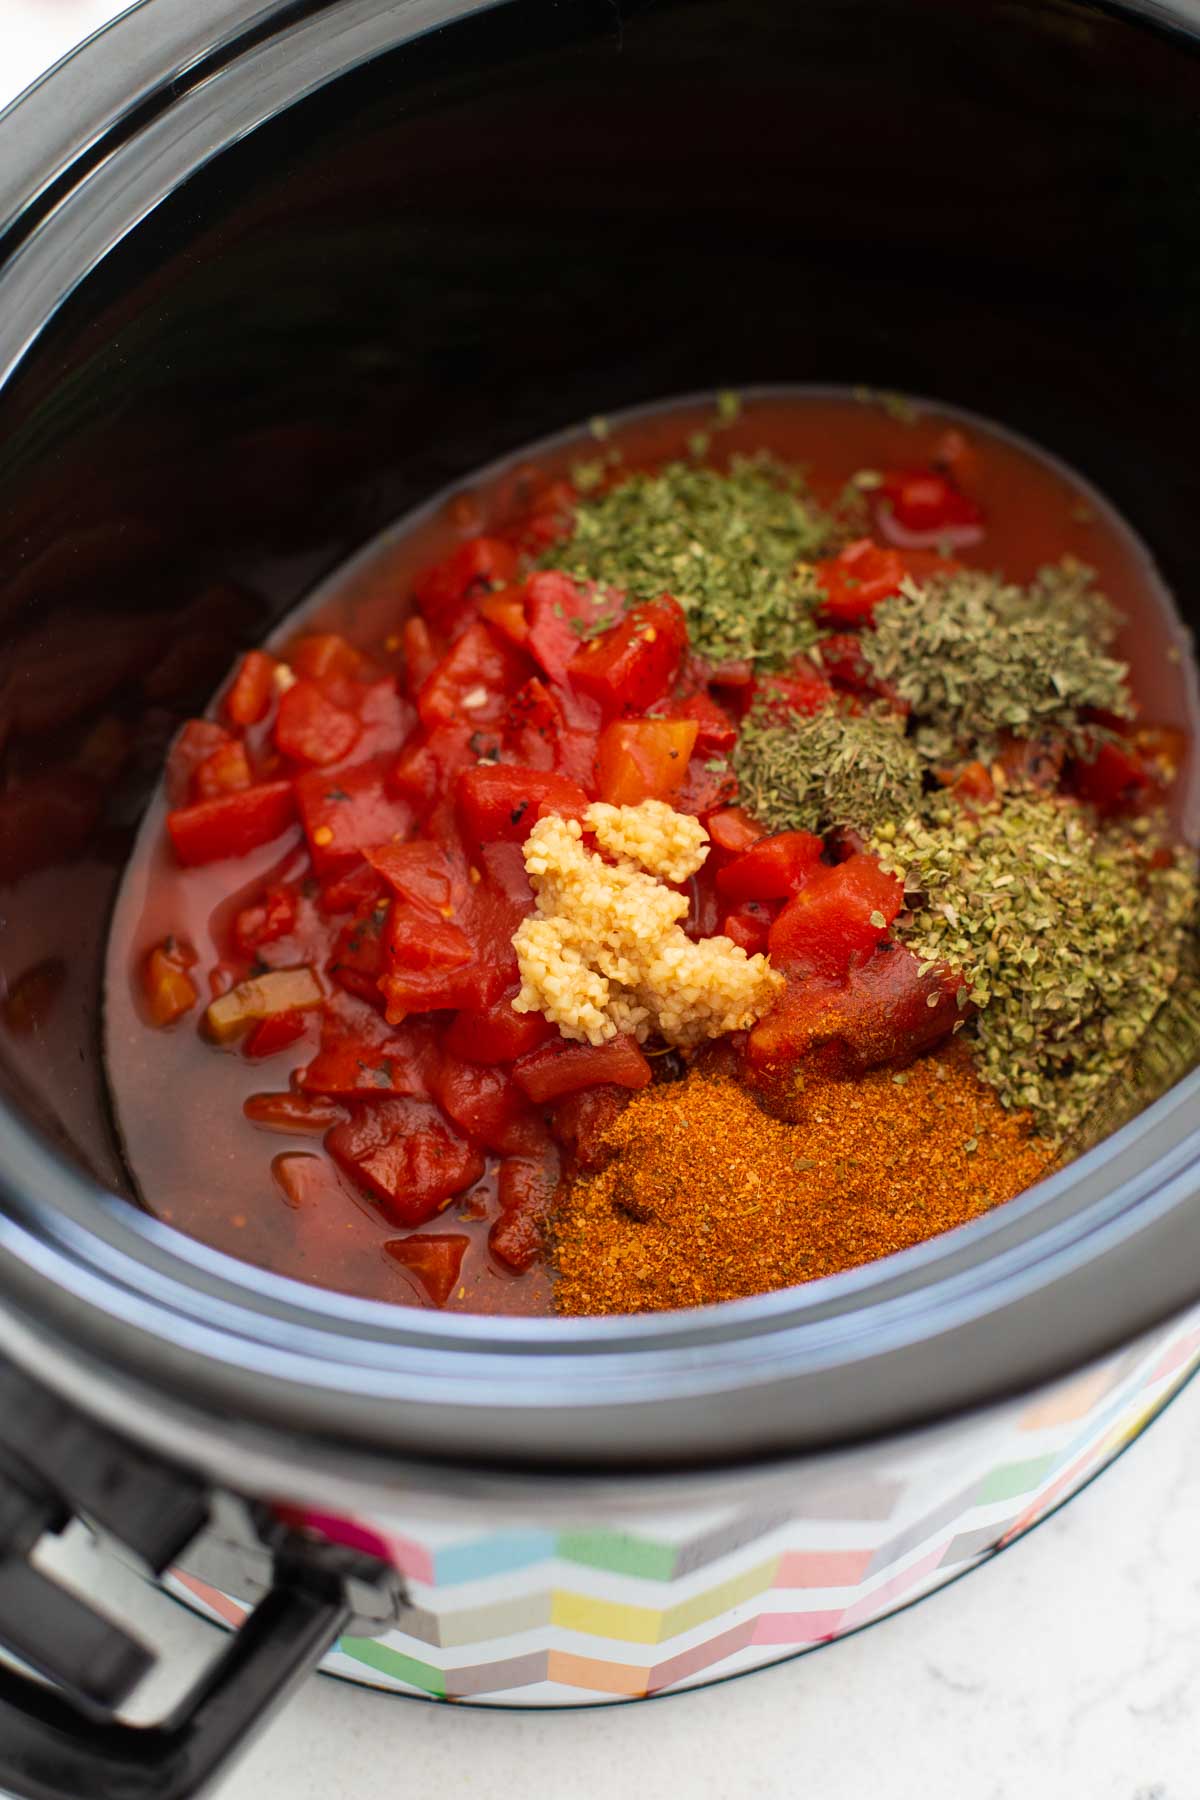 The tomatoes and dried herbs and seasonings are added to the slowcooker.